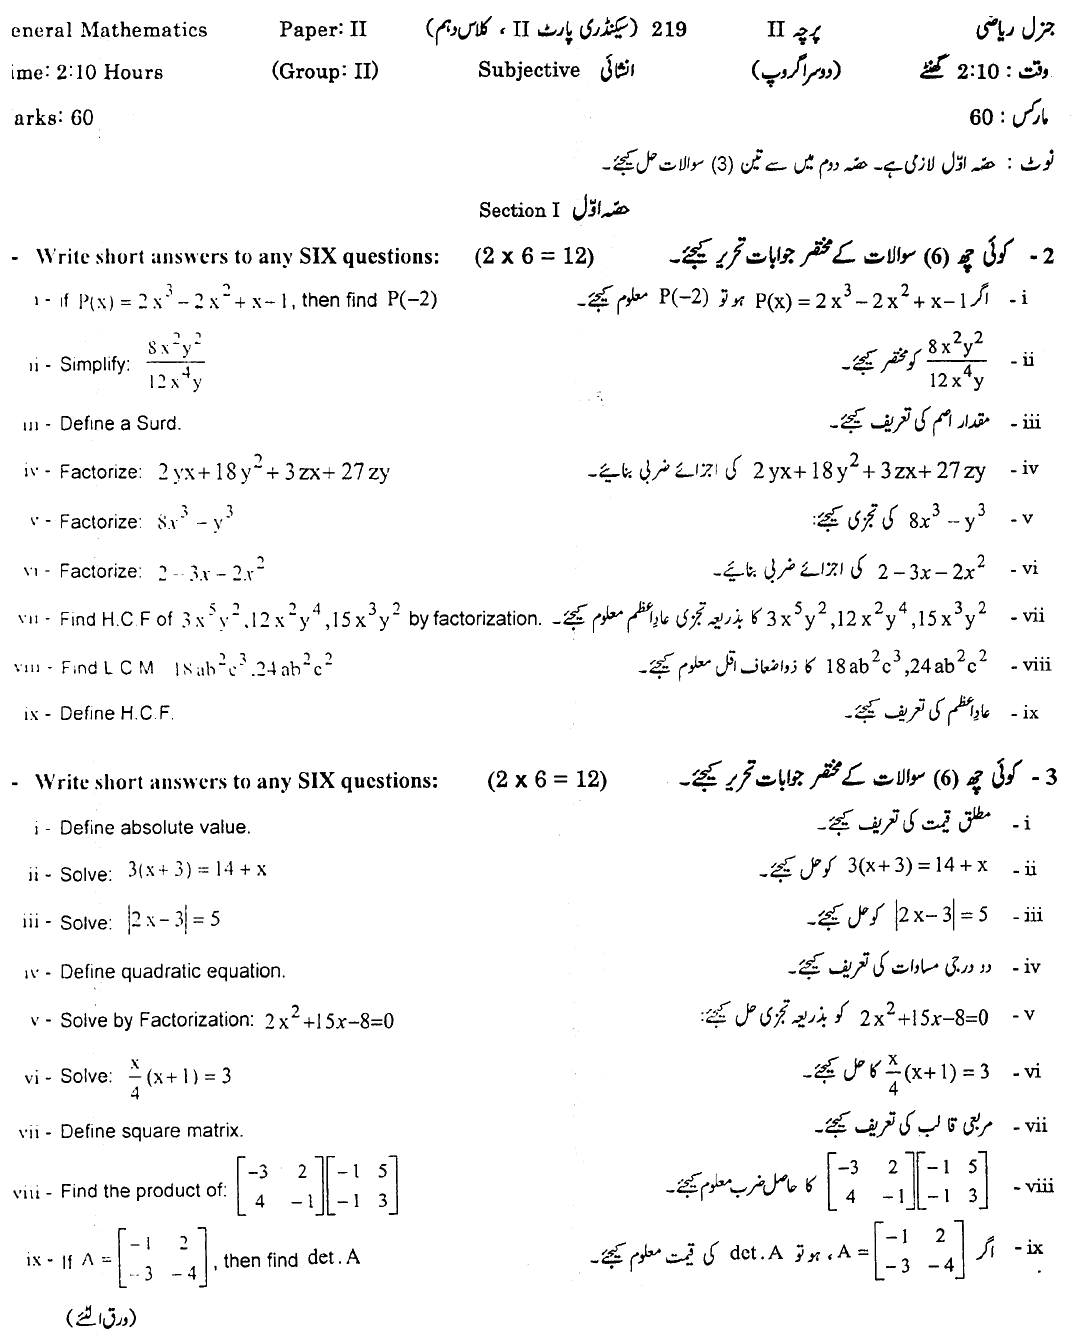 10th Class General Mathematics Paper 2019 Gujranwala Board Subjective Group 2